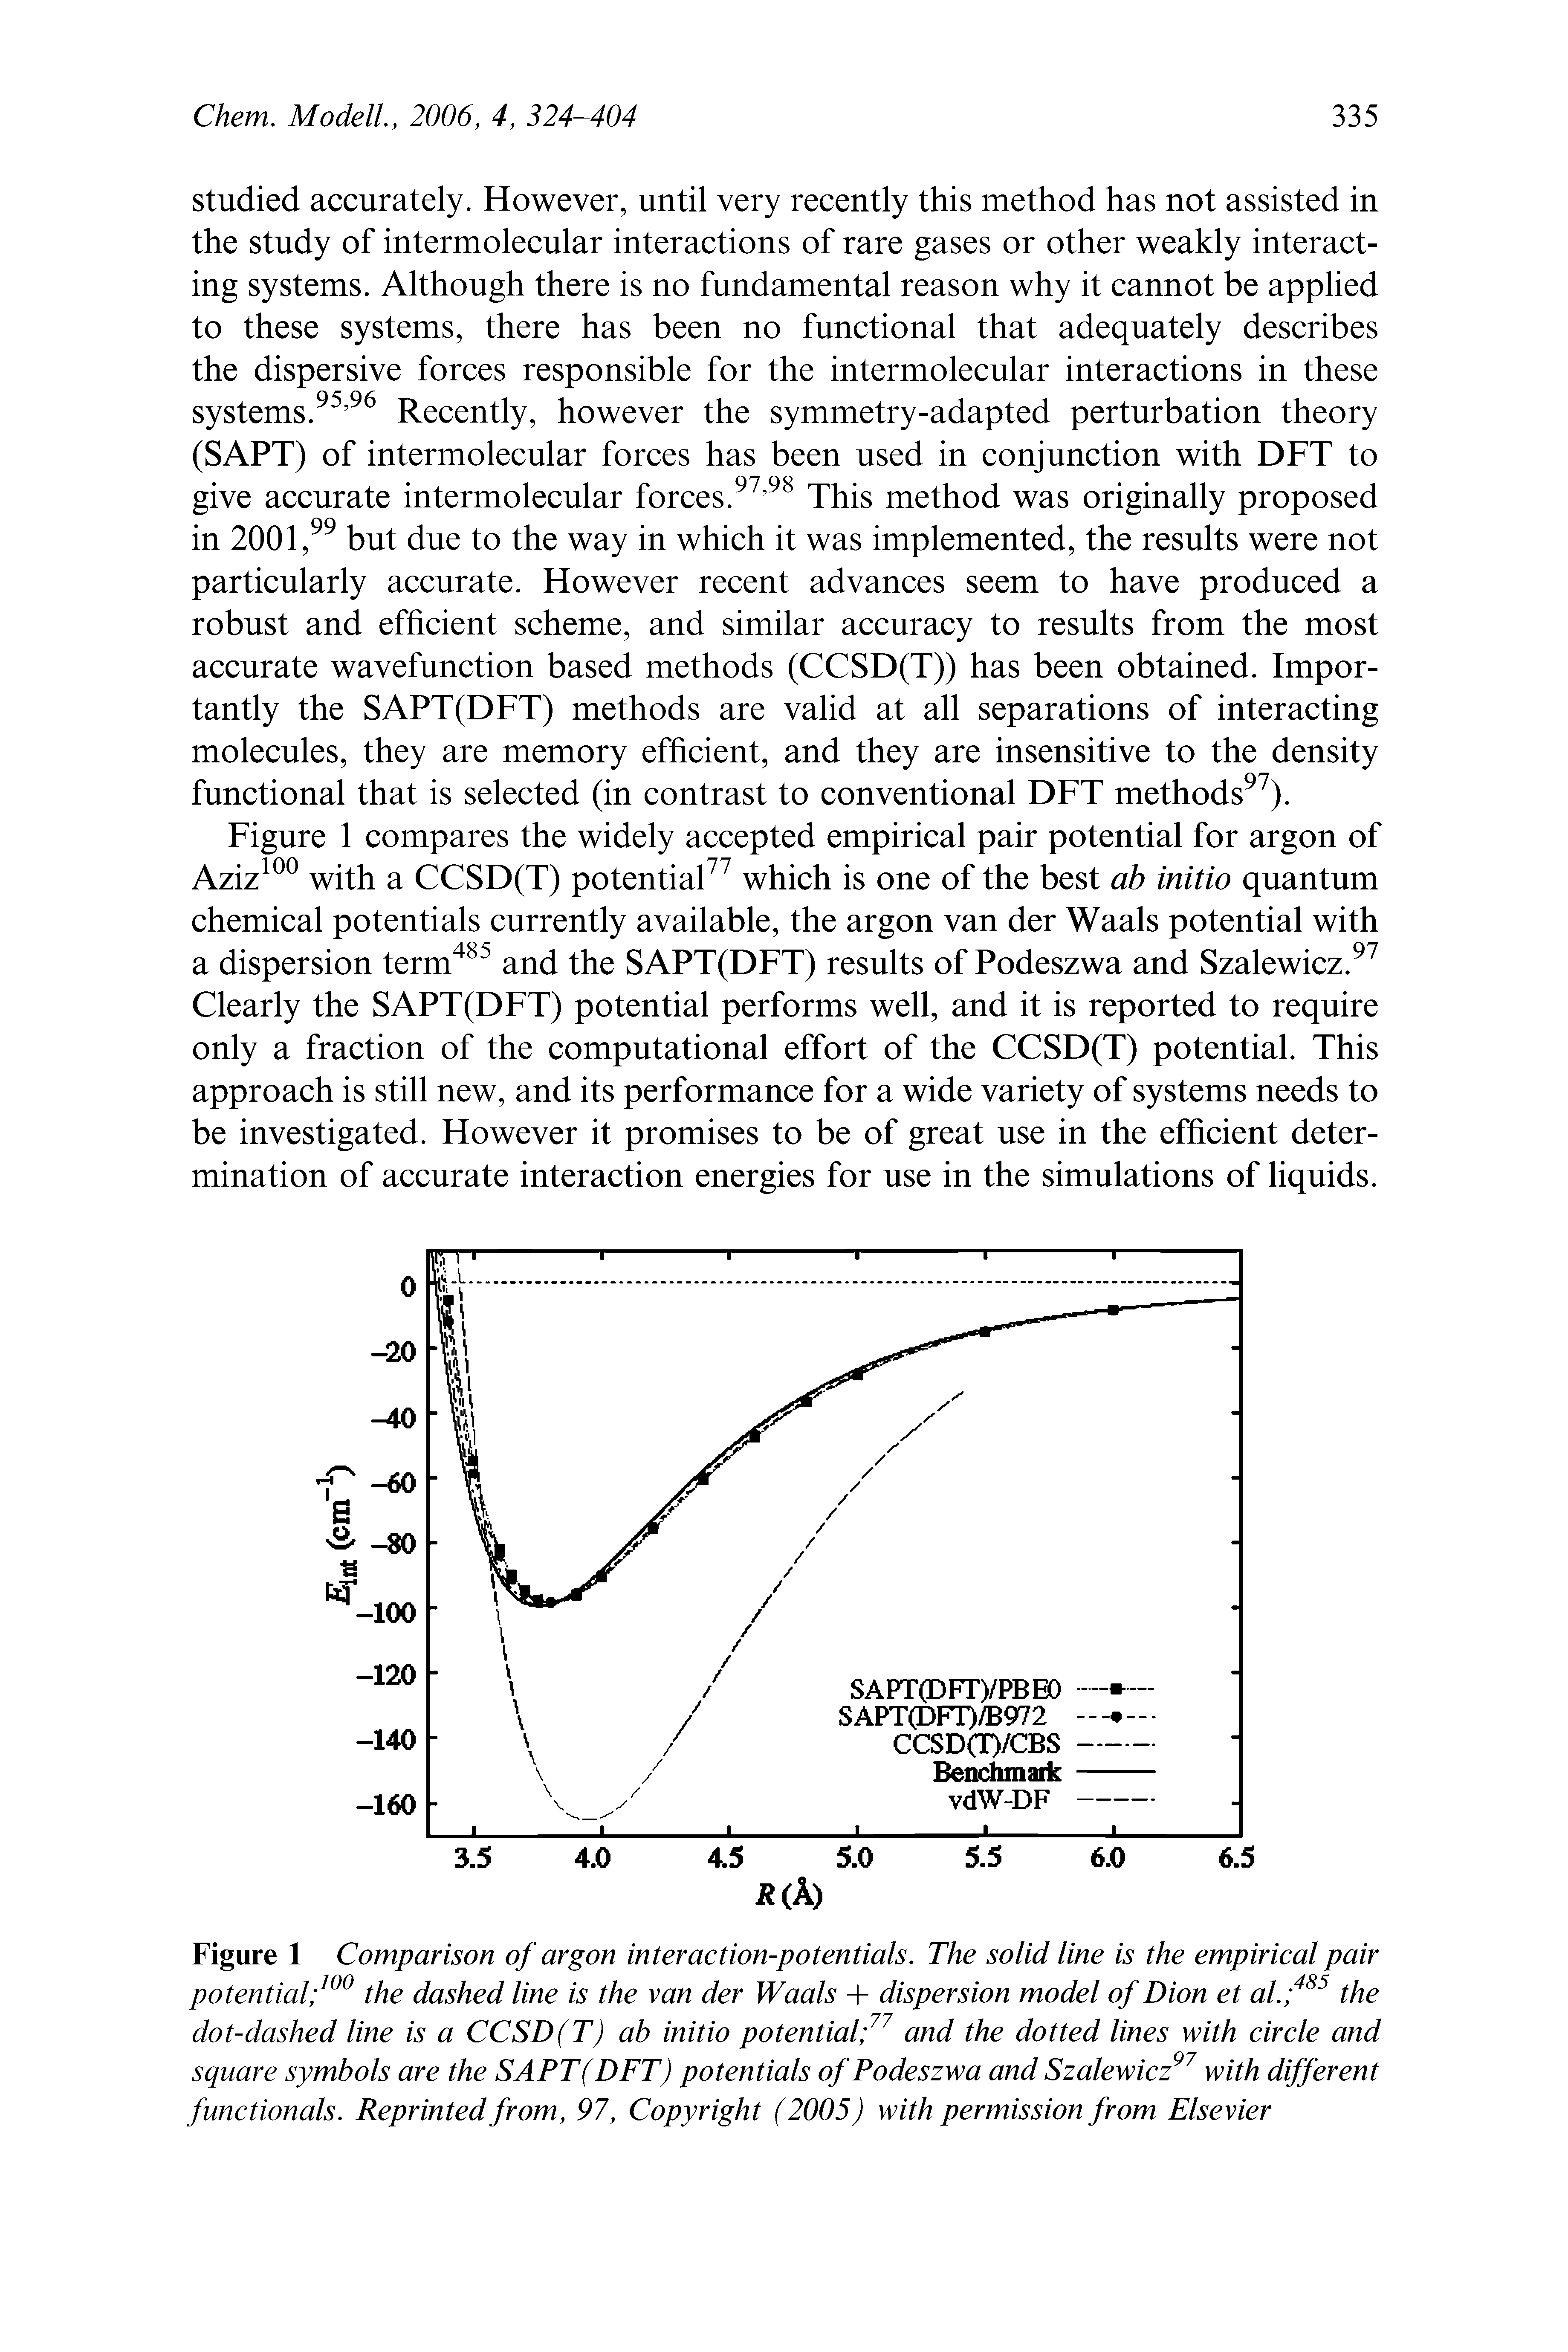 Figure 1 Comparison of argon interaction-potentials. The solid line is the empirical pair potential 100 the dashed line is the van der Waals + dispersion model of Dion et al. 485 the dot-dashed line is a CCSD(T) ab initio potential 77 and the dotted lines with circle and square symbols are the SAPT (DFT) potentials of Podeszwa and Szalewicz97 with different functionals. Reprinted from, 97, Copyright (2005) with permission from Elsevier...